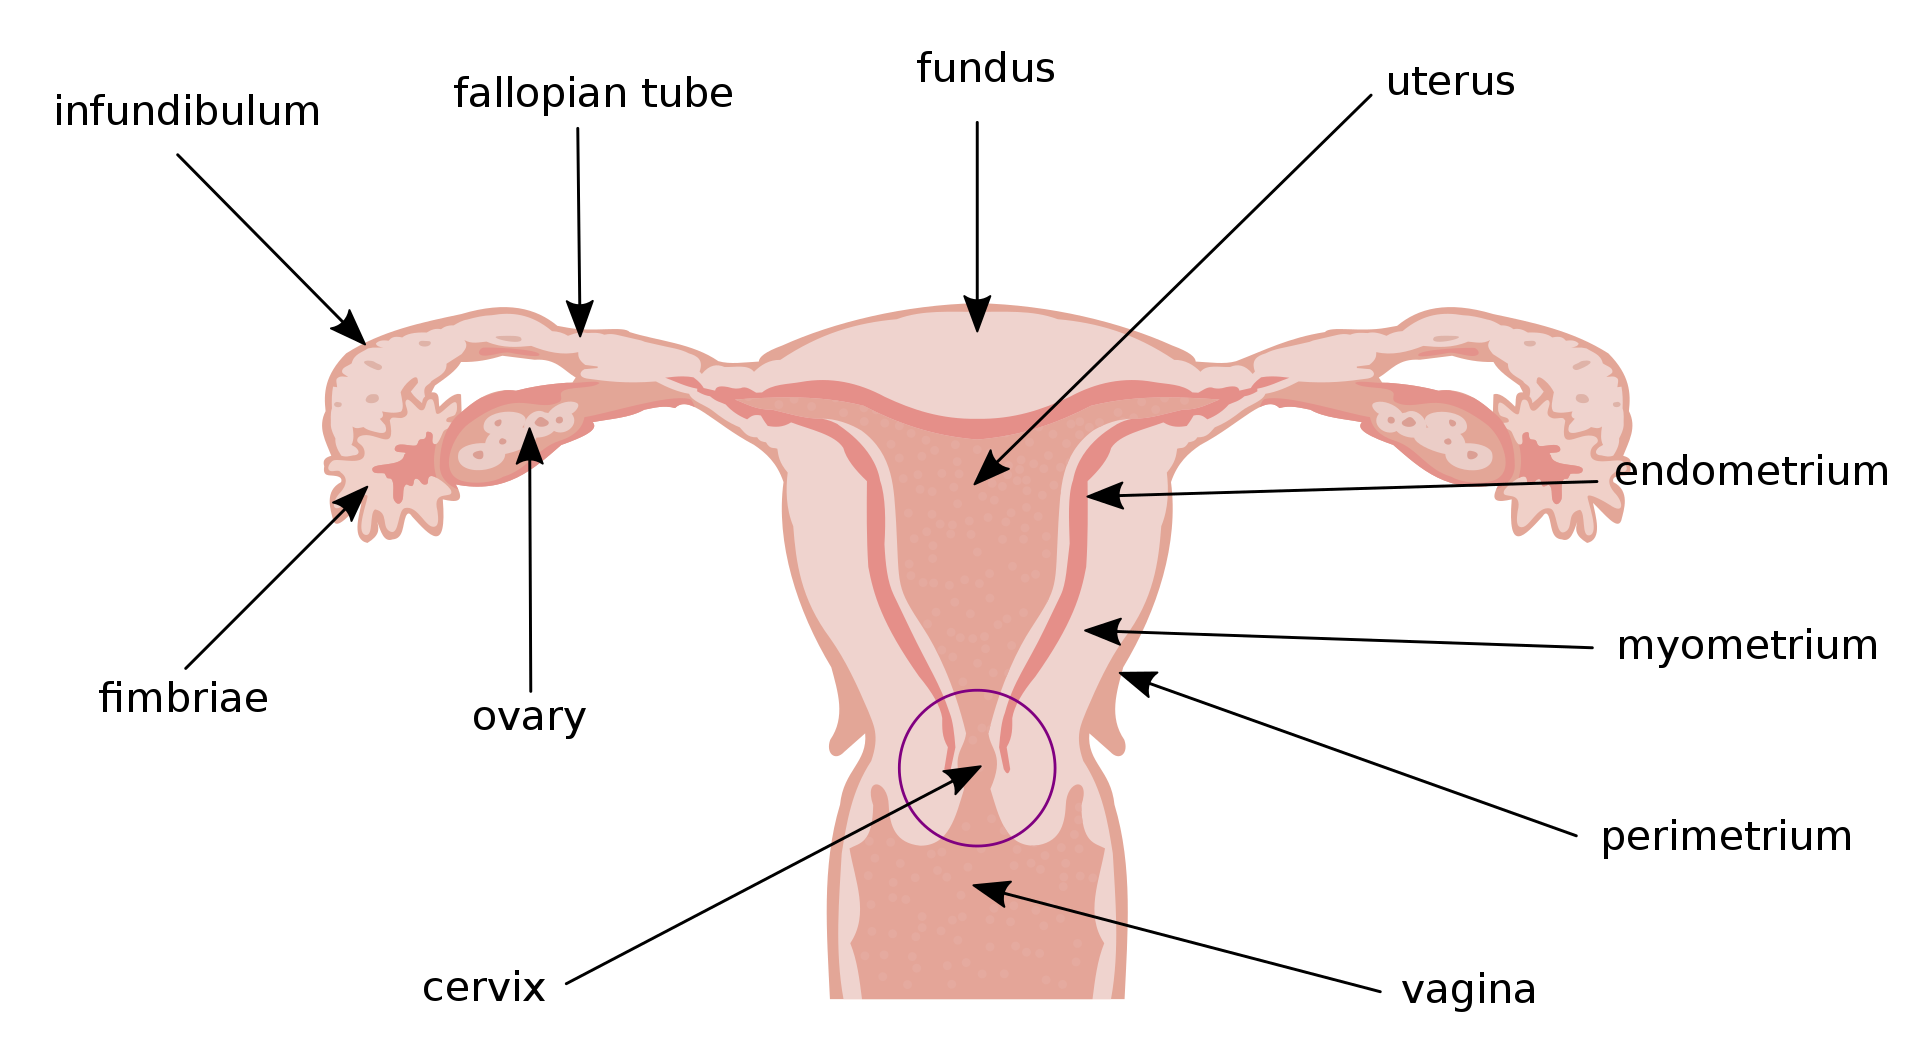 Bulky Uterus: Symptoms, Causes and Treatment